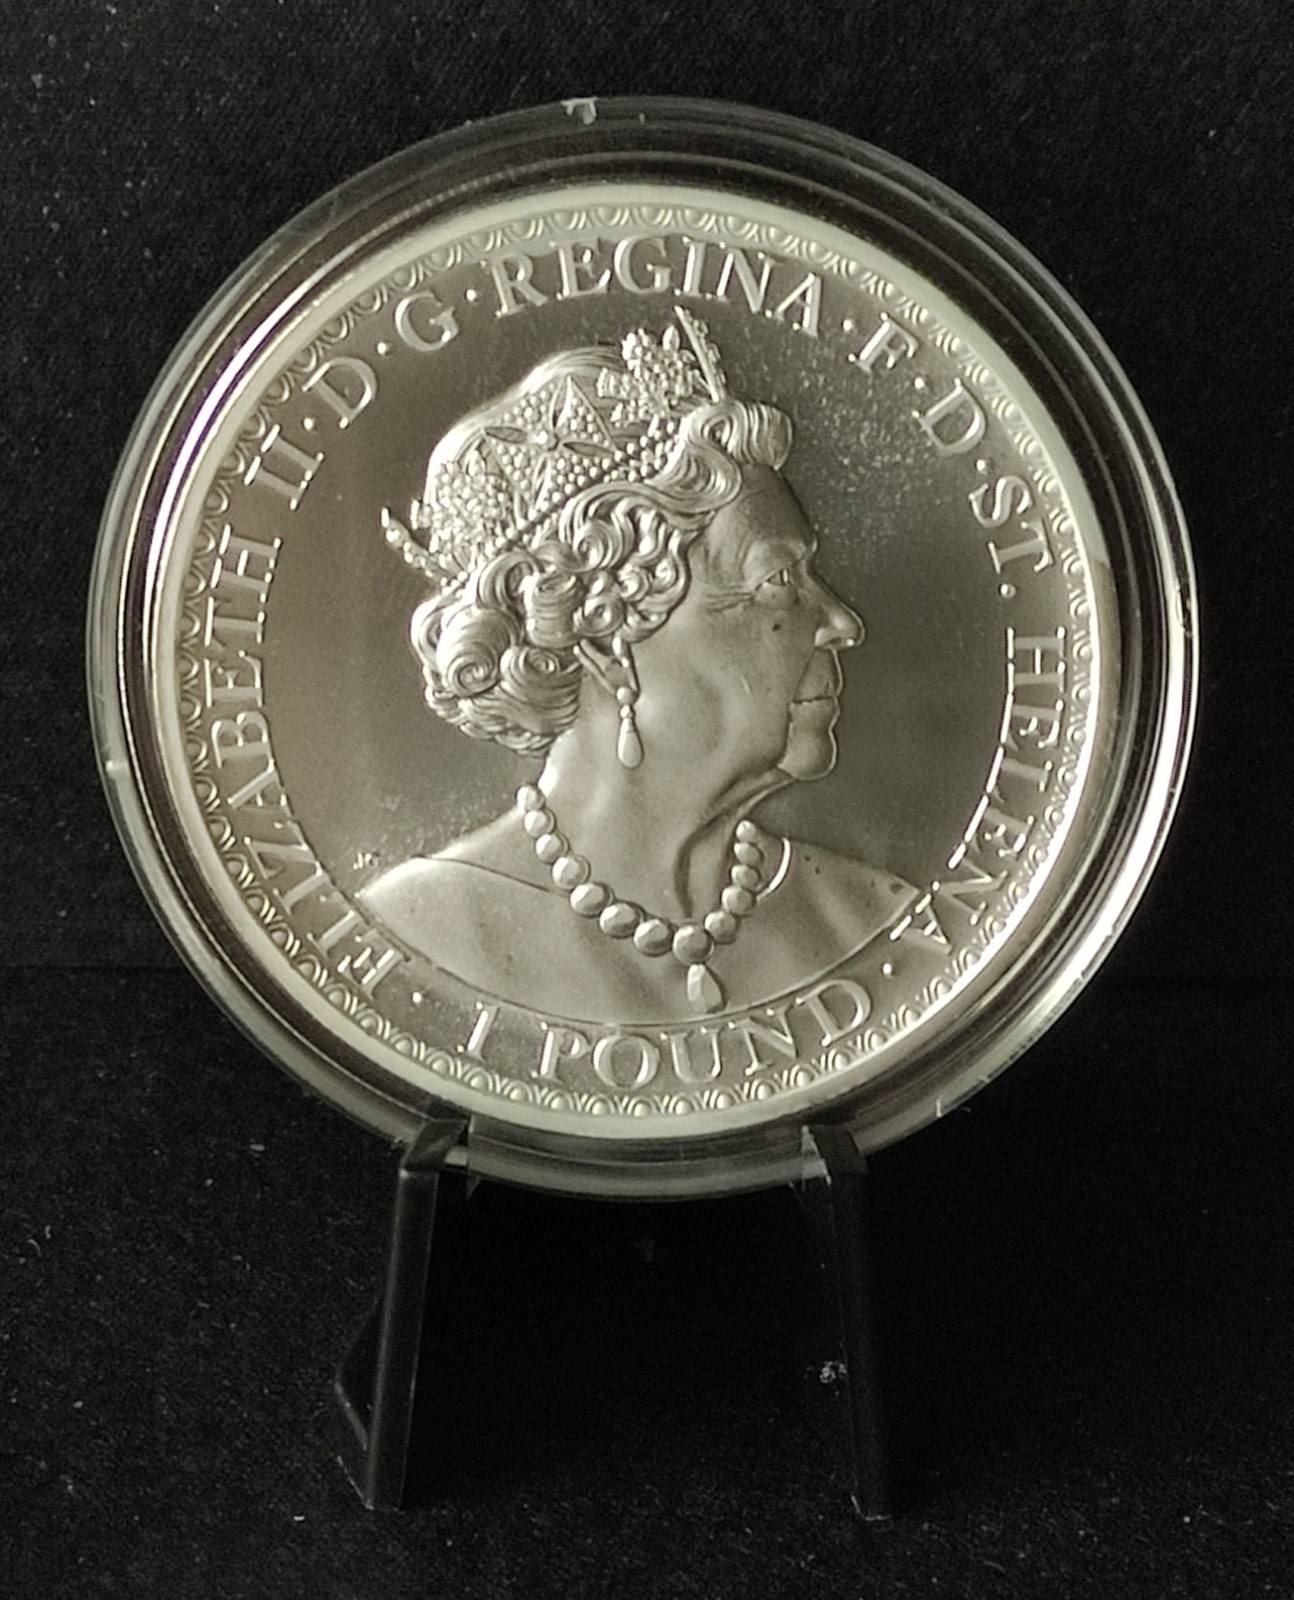 2021 St. Helena Una and the Lion 1 oz Silver Coin BU in Capsule